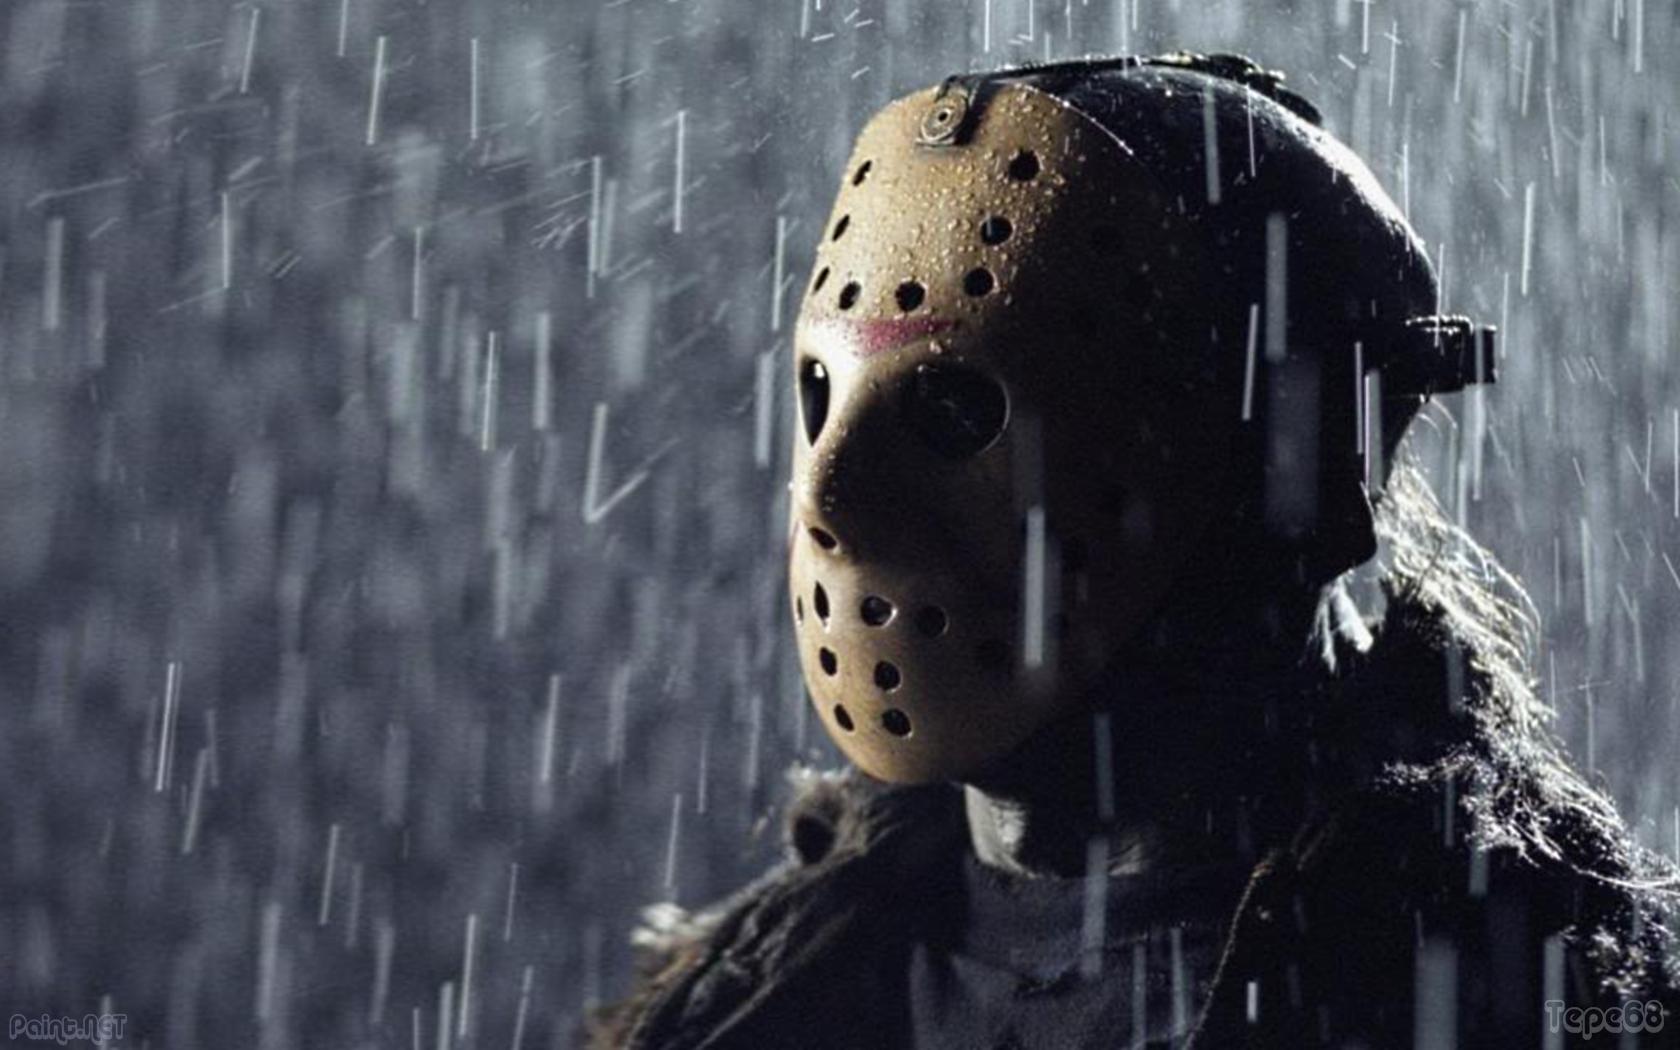 Interesting Fan Analysis Video Diagnoses Jason Voorhees